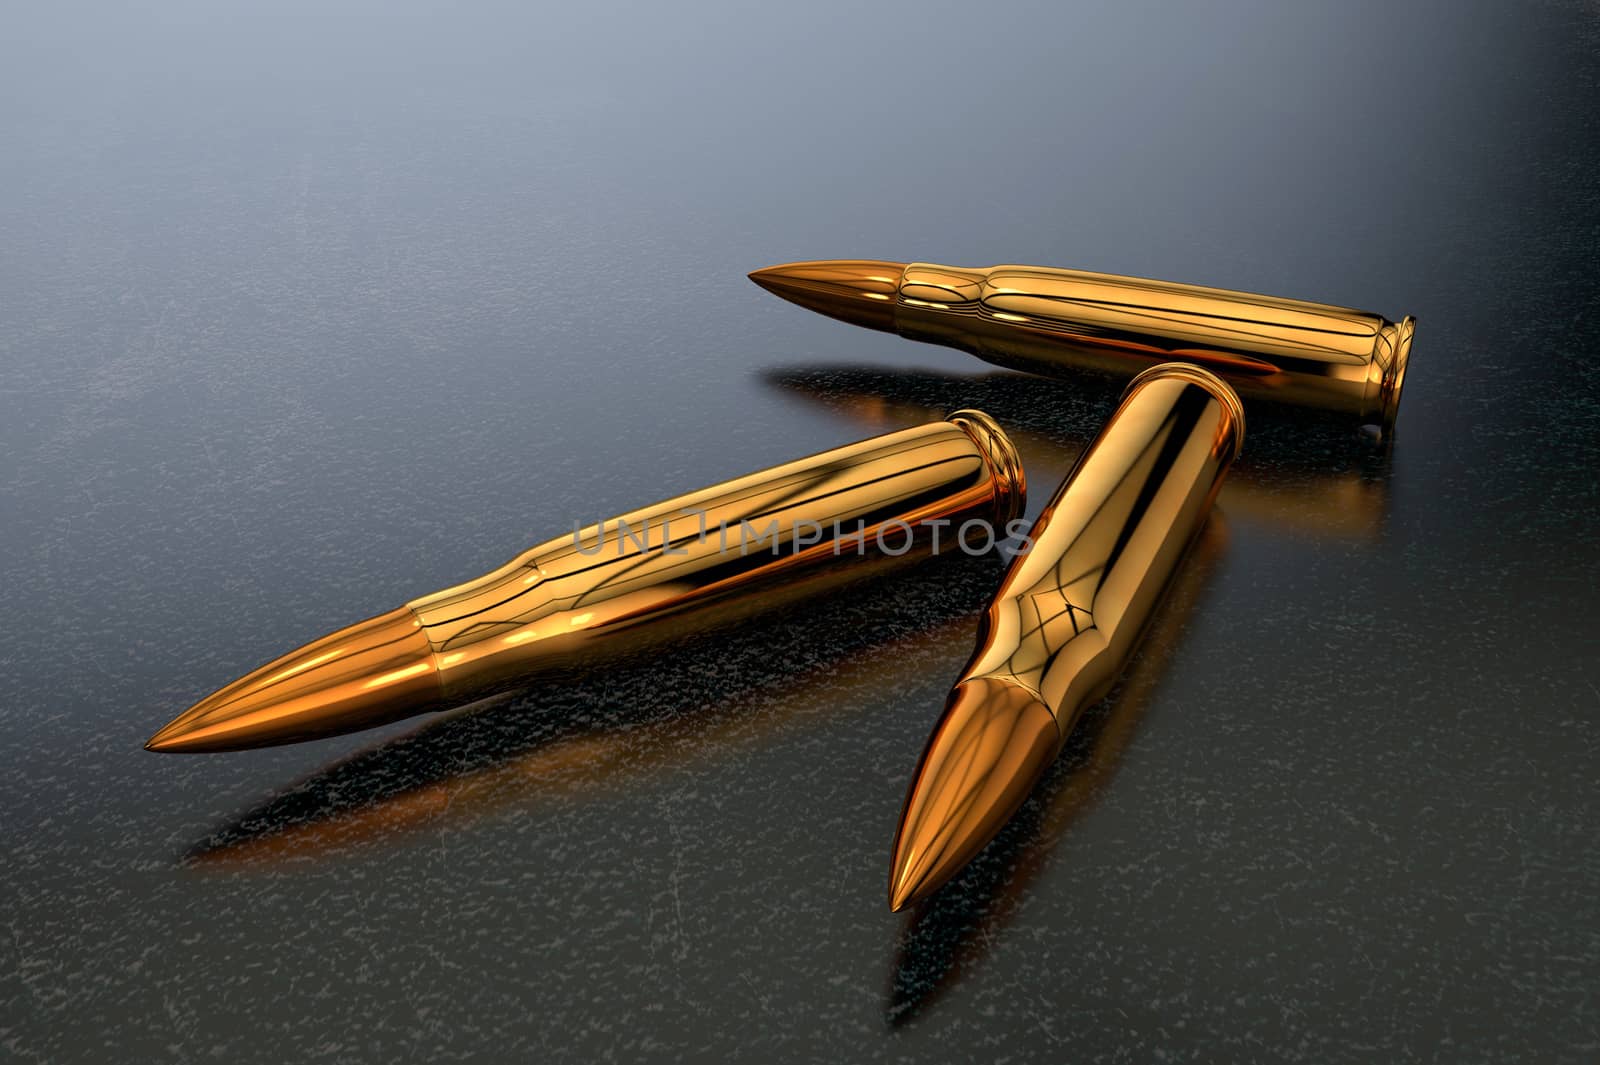 3D illustration of three large-caliber cartridges lying on a dark and glossy surface